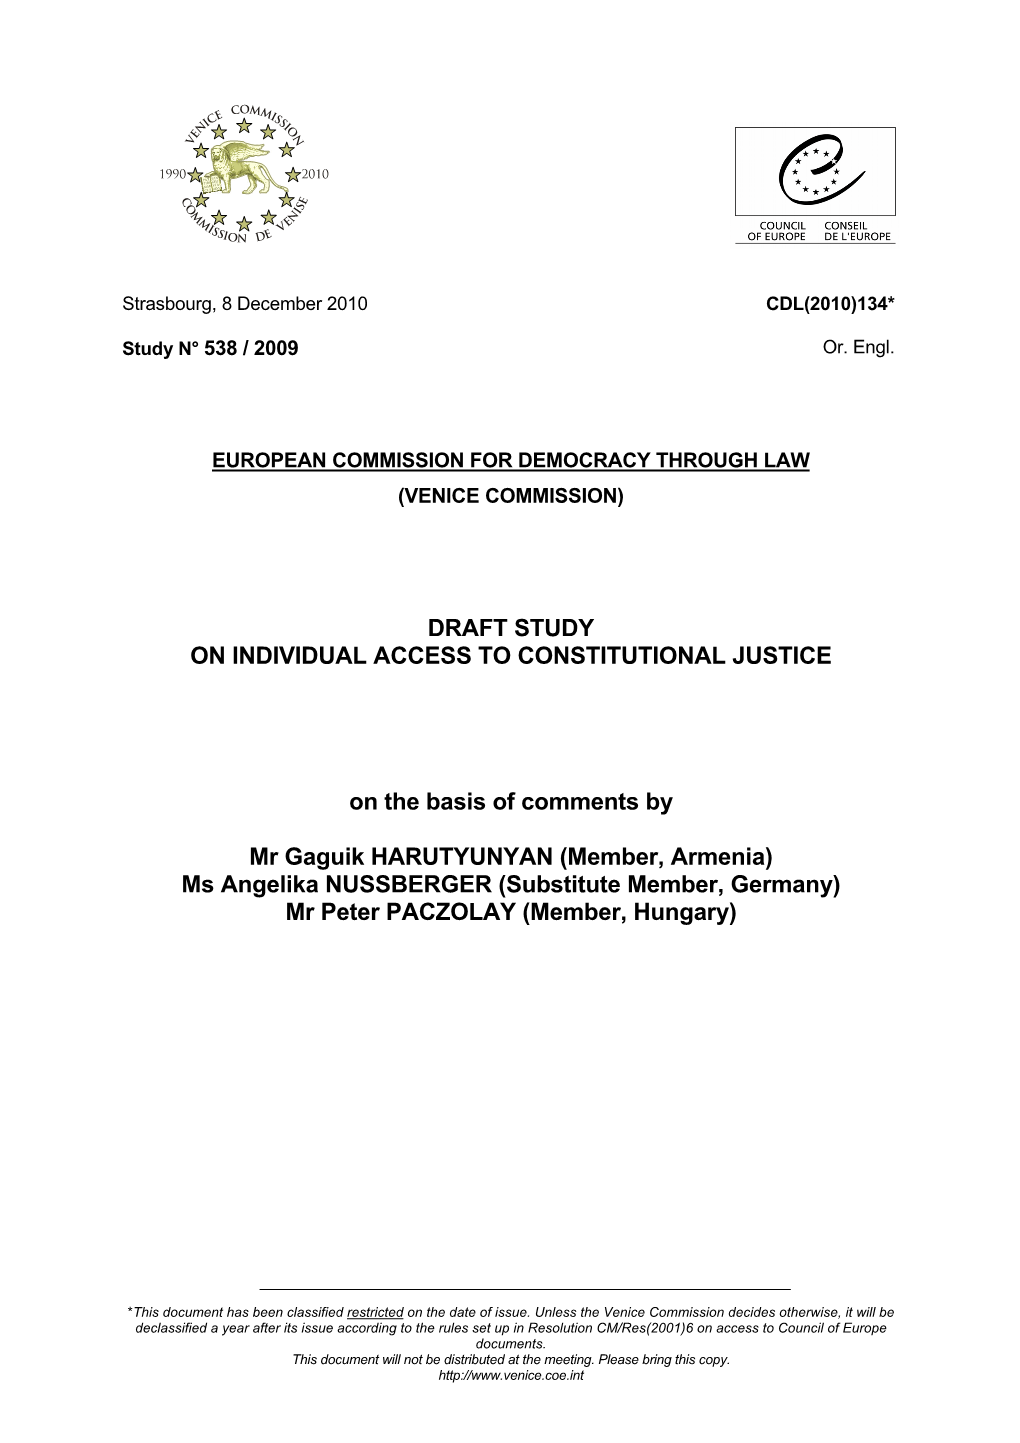 Draft Study on Individual Access to Constitutional Justice